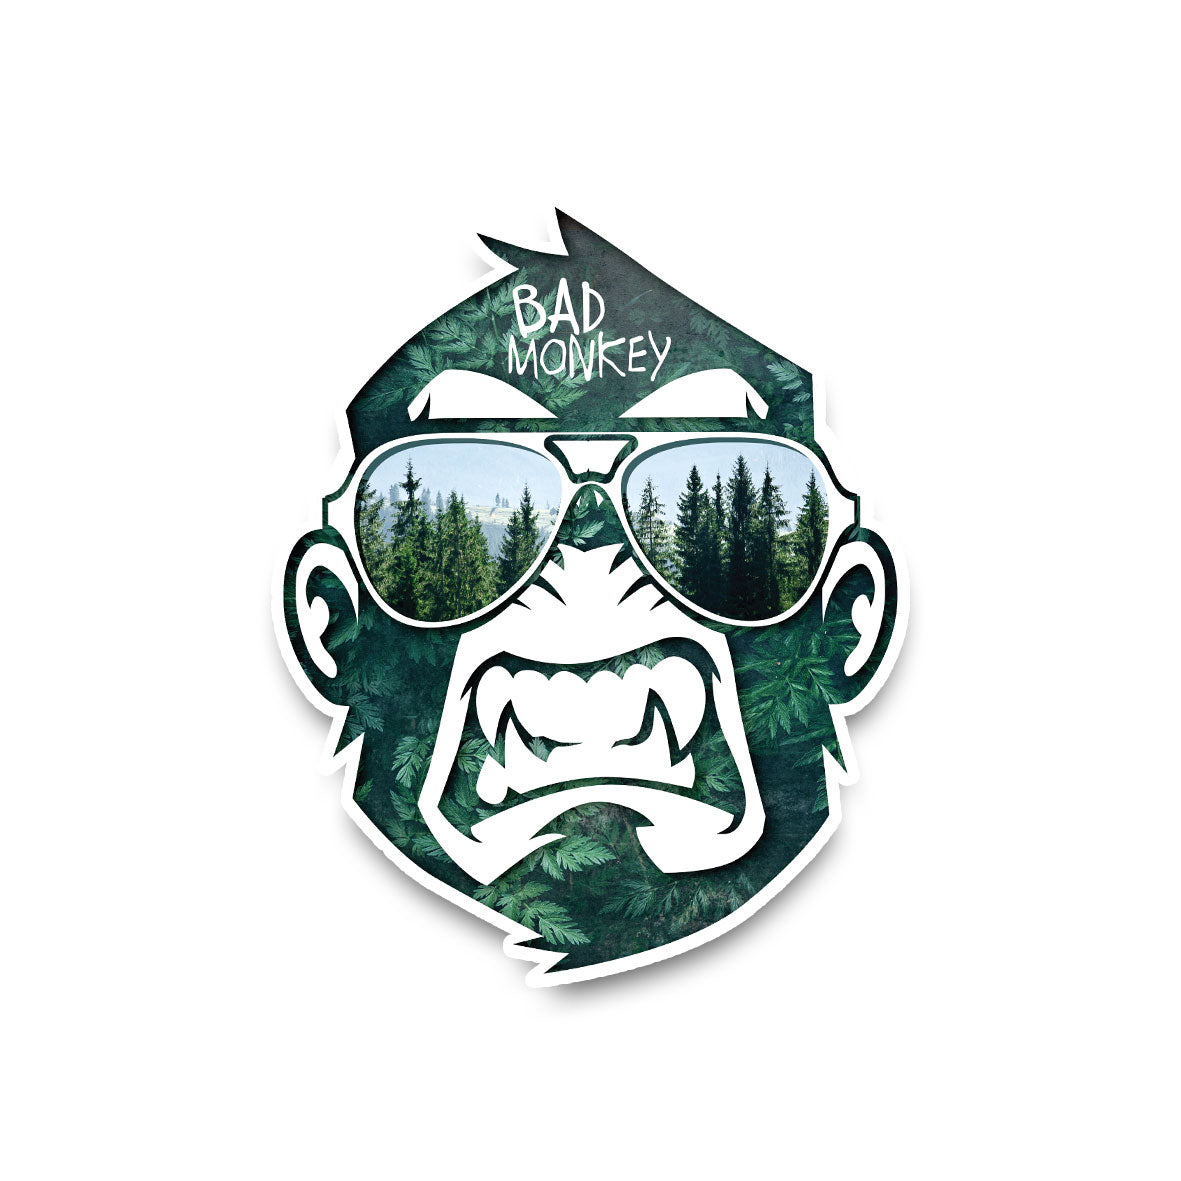 Monkey's Stickers Pack